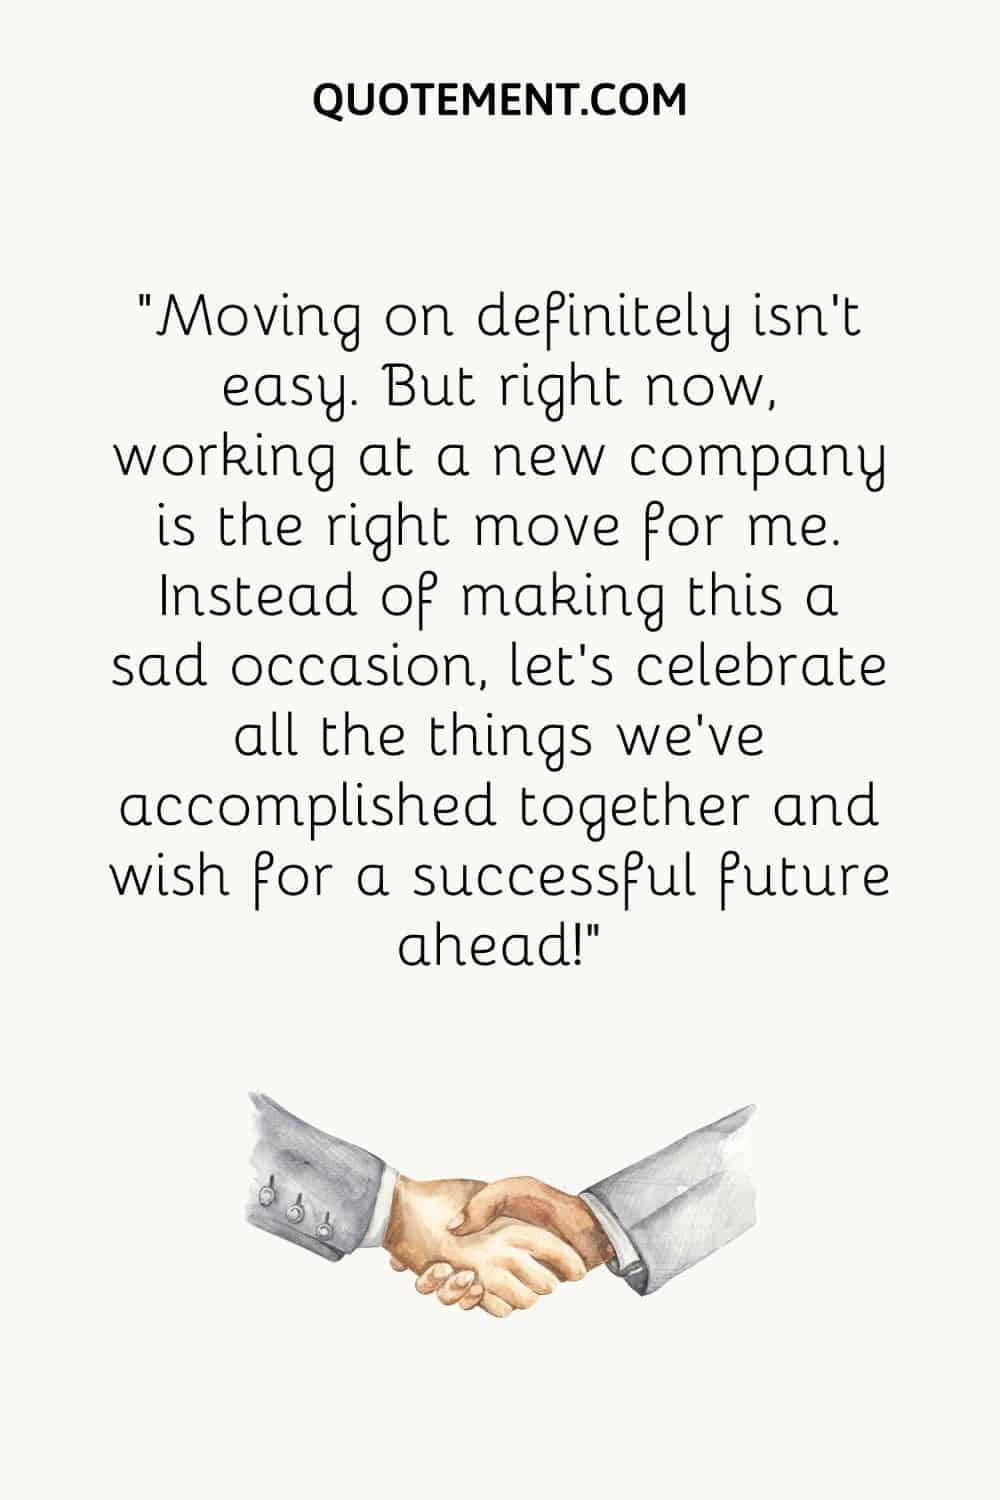 Moving on definitely isn’t easy. But right now, working at a new company is the right move for me.